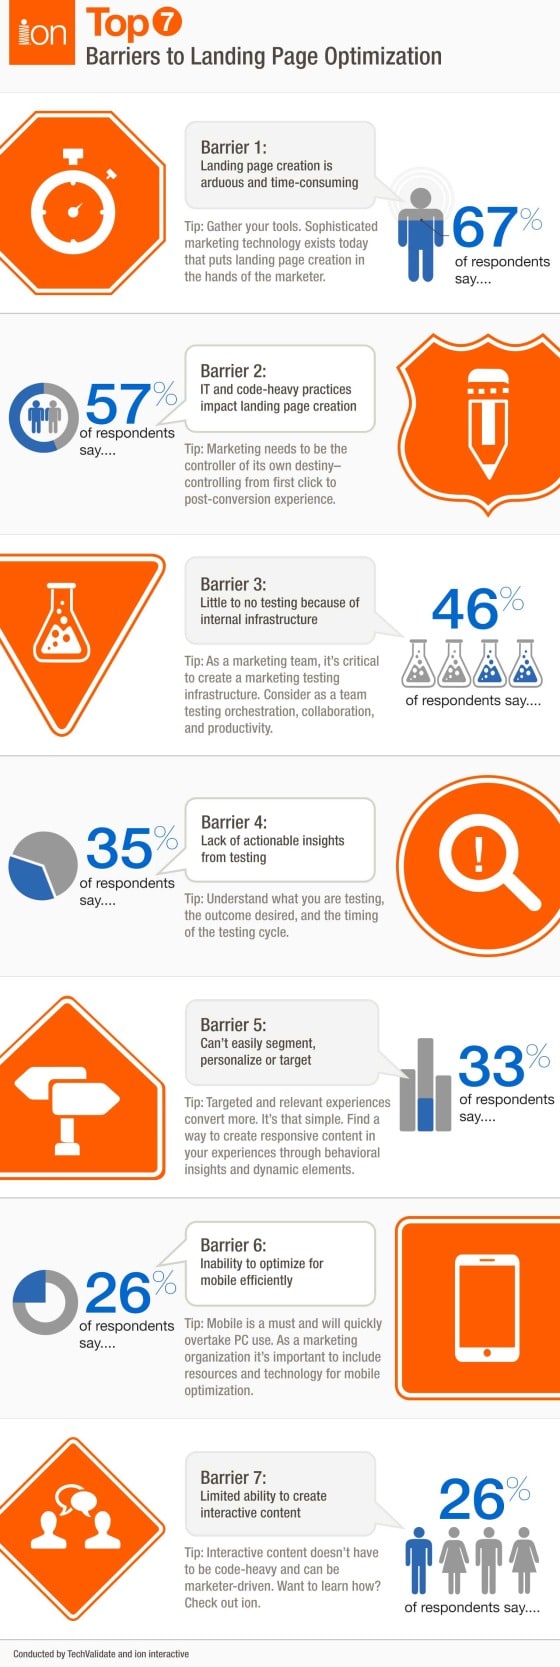 7 Barriers To Landing Page Optimization [Infographic]